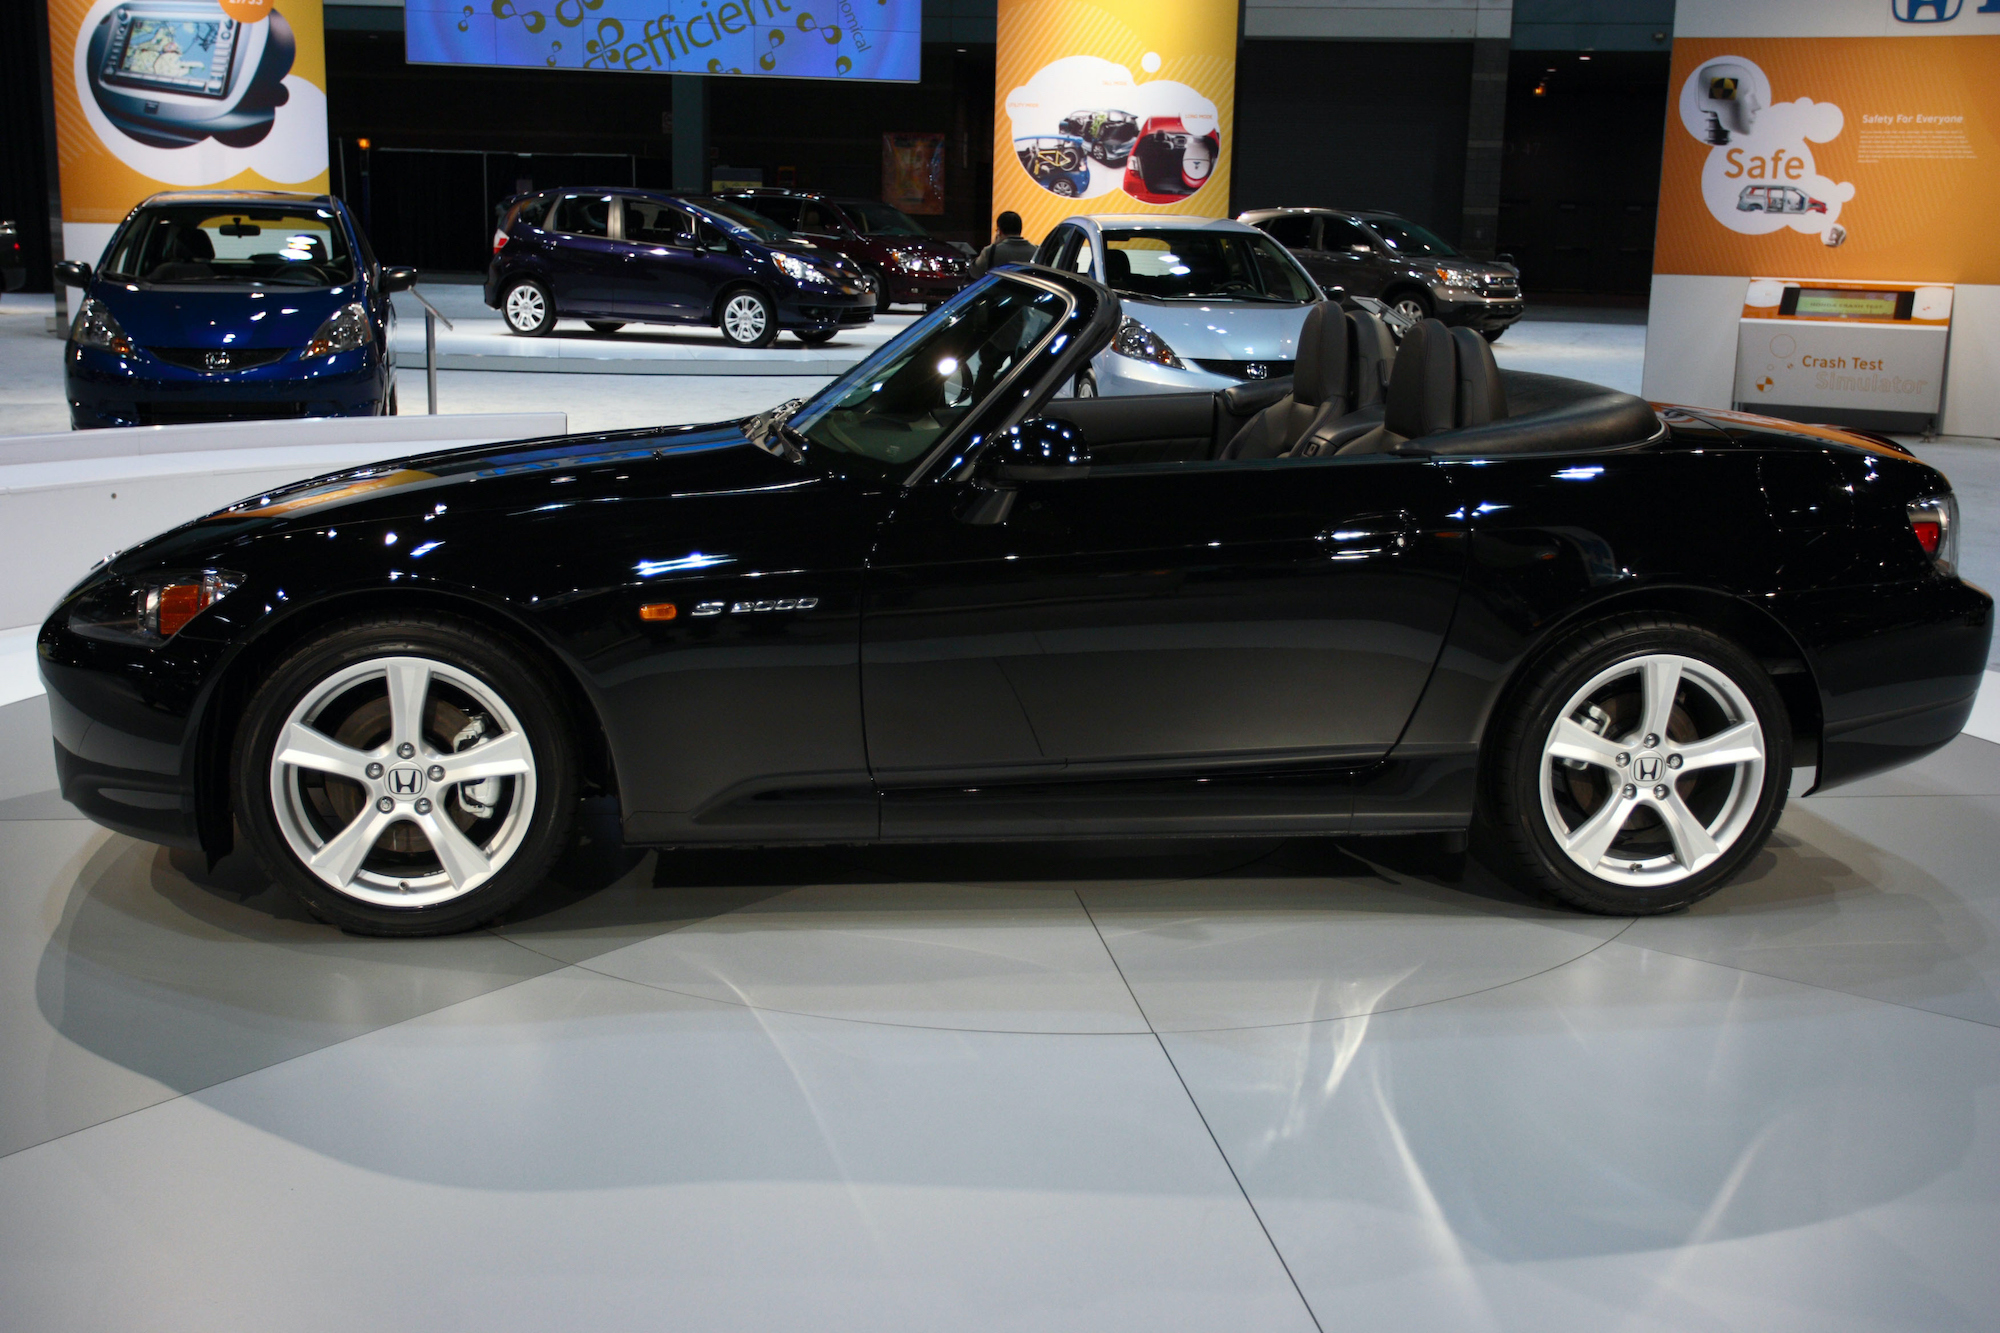 2009 Honda S2000 | Getty Images